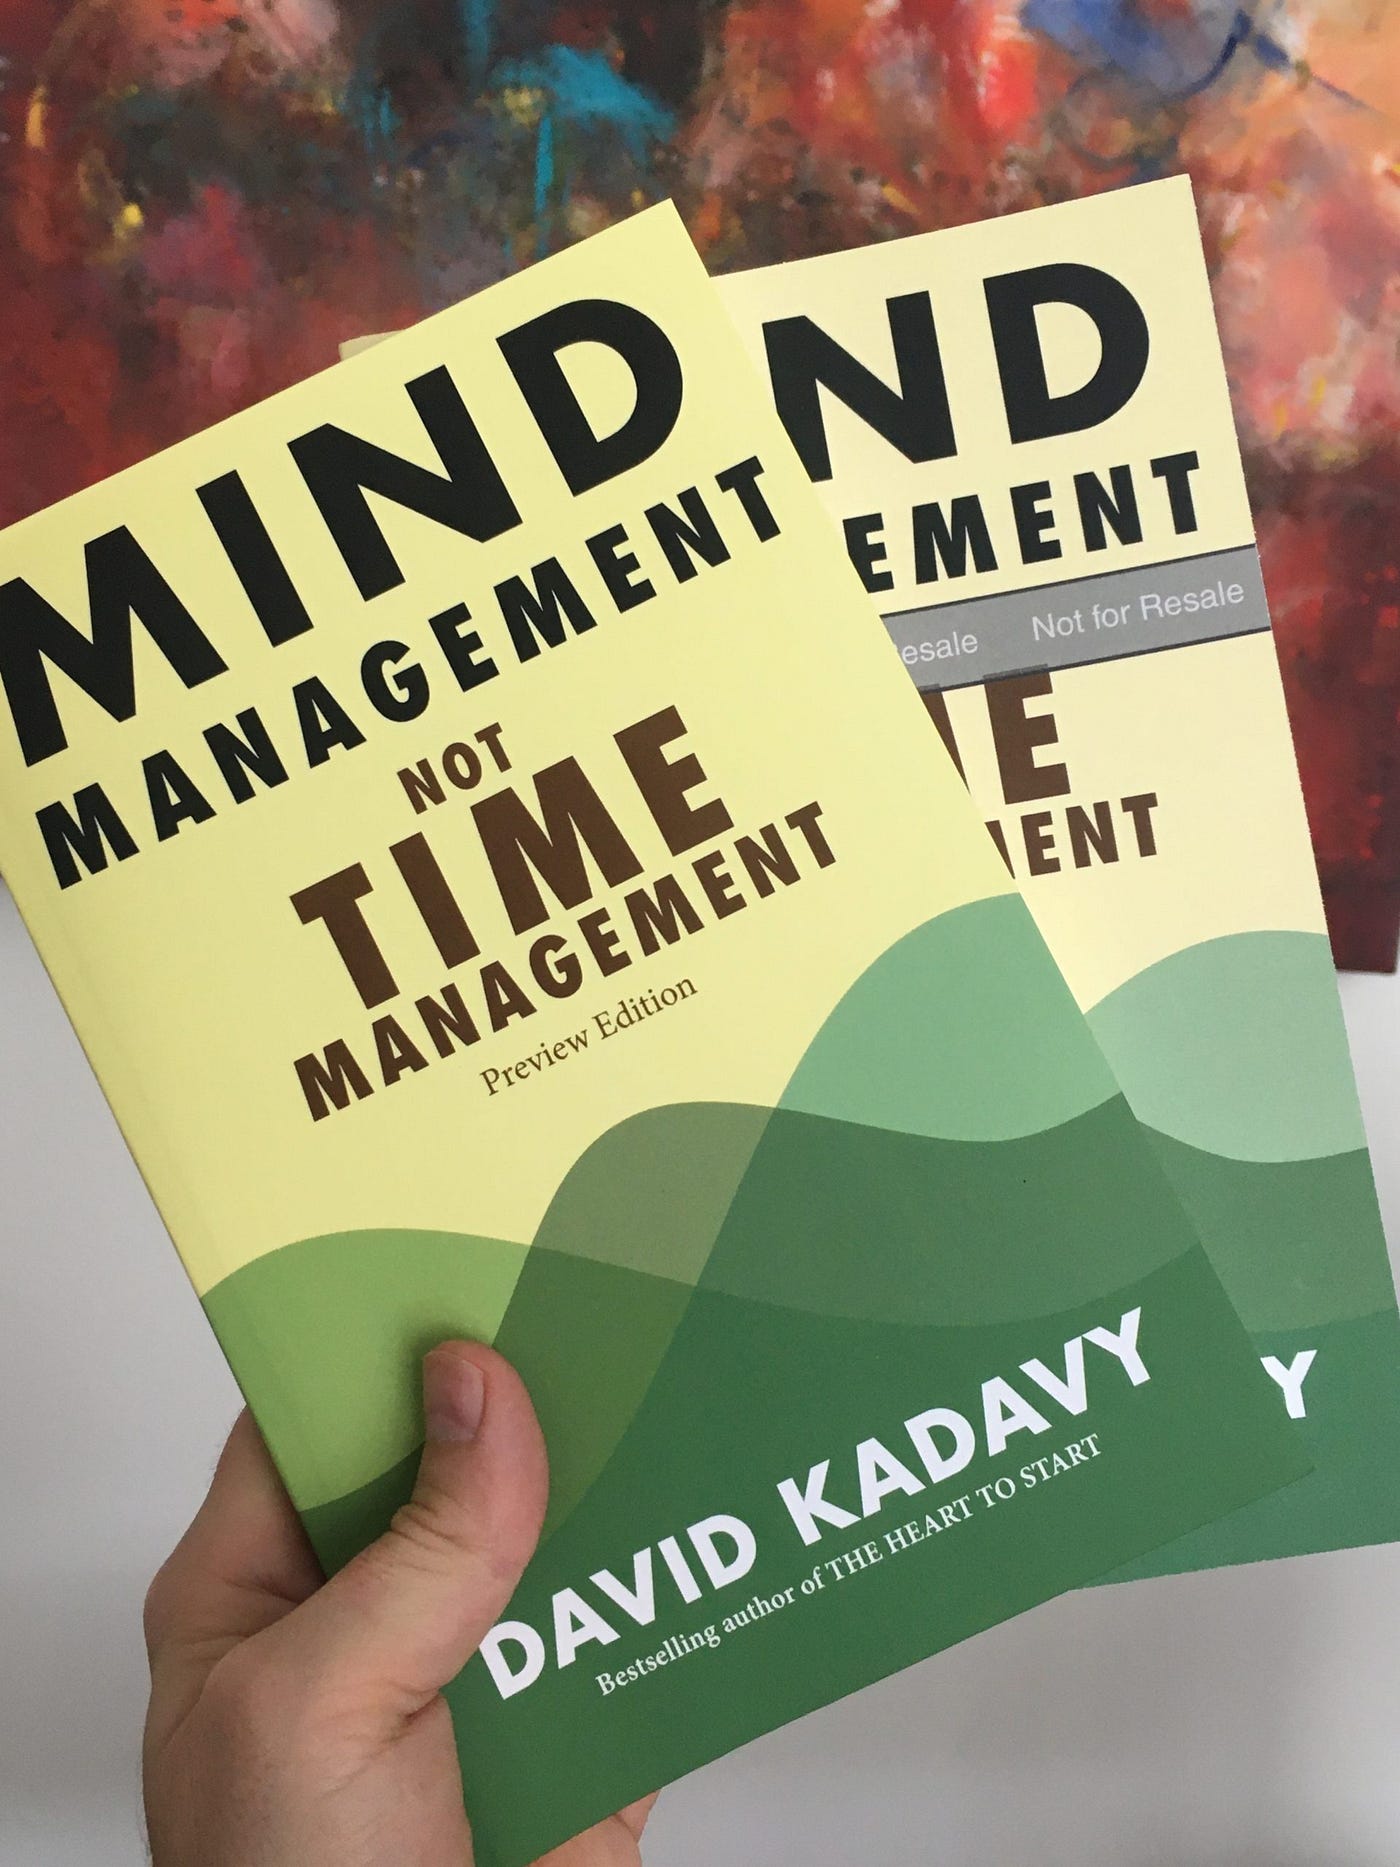 mind management not time management book review